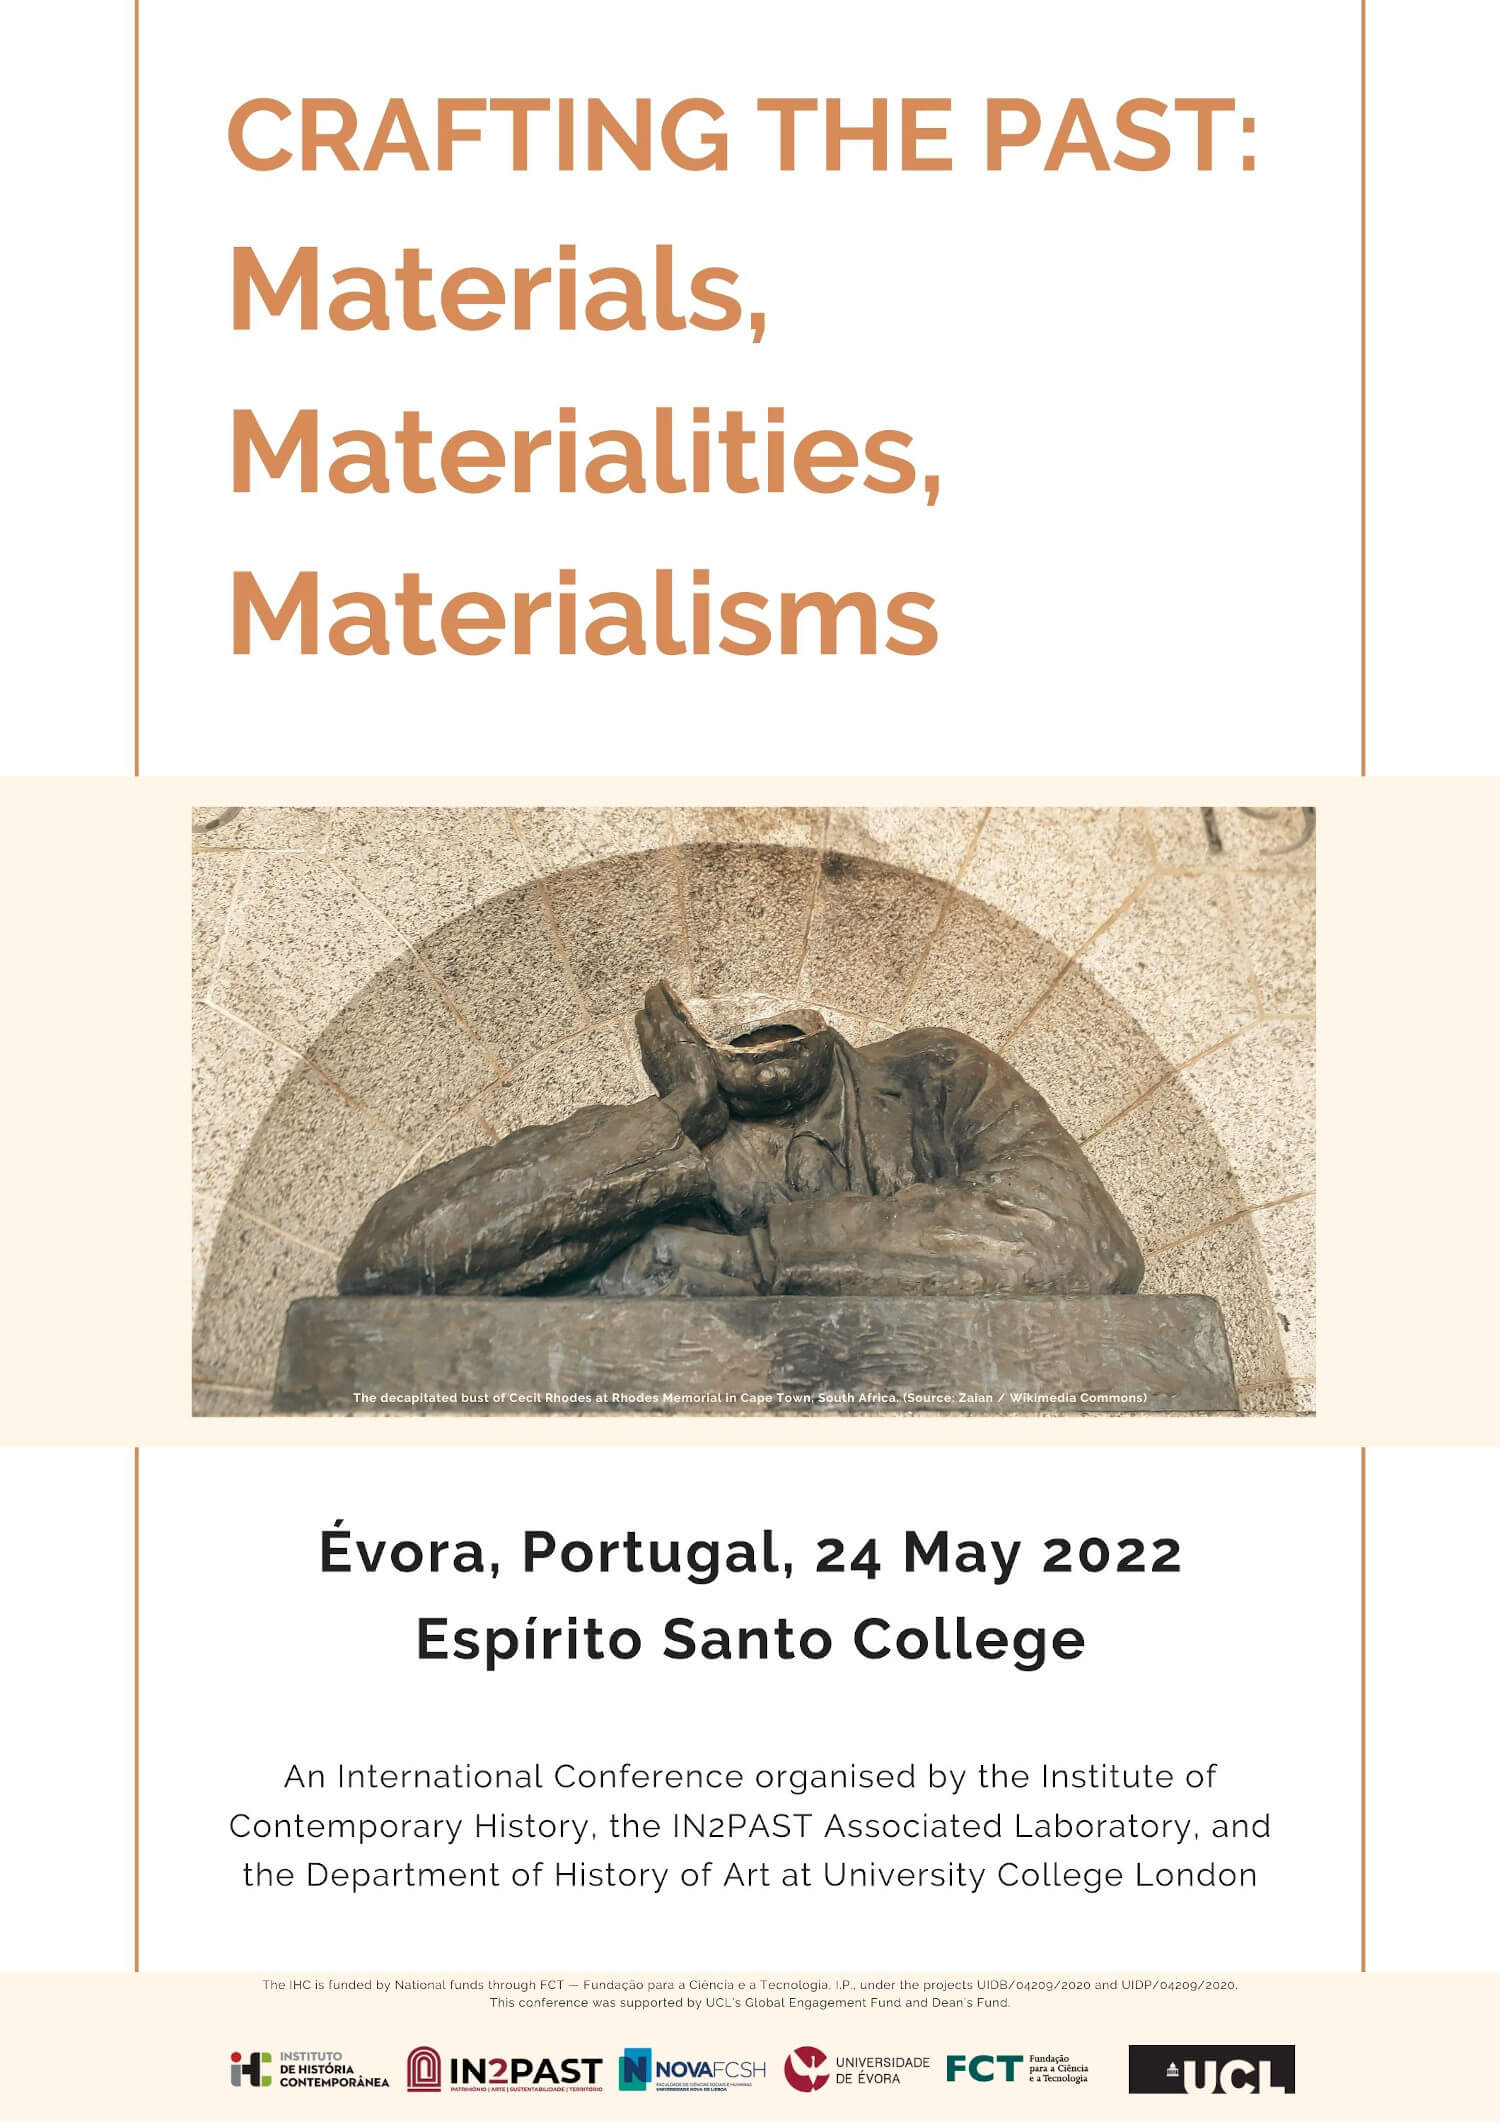 Poster for the conference "Crafting the Past: Materials, Materialities, Materialisms". Évora, 24 May 2022, Espírito Santo College